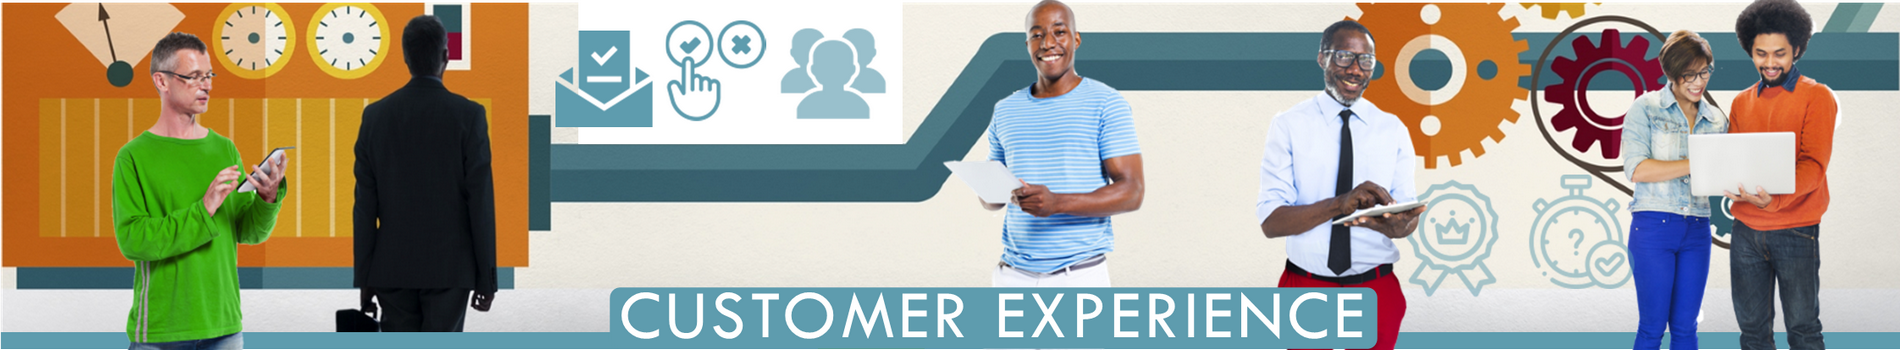 Enhance Customer Experience with Marketing Automation